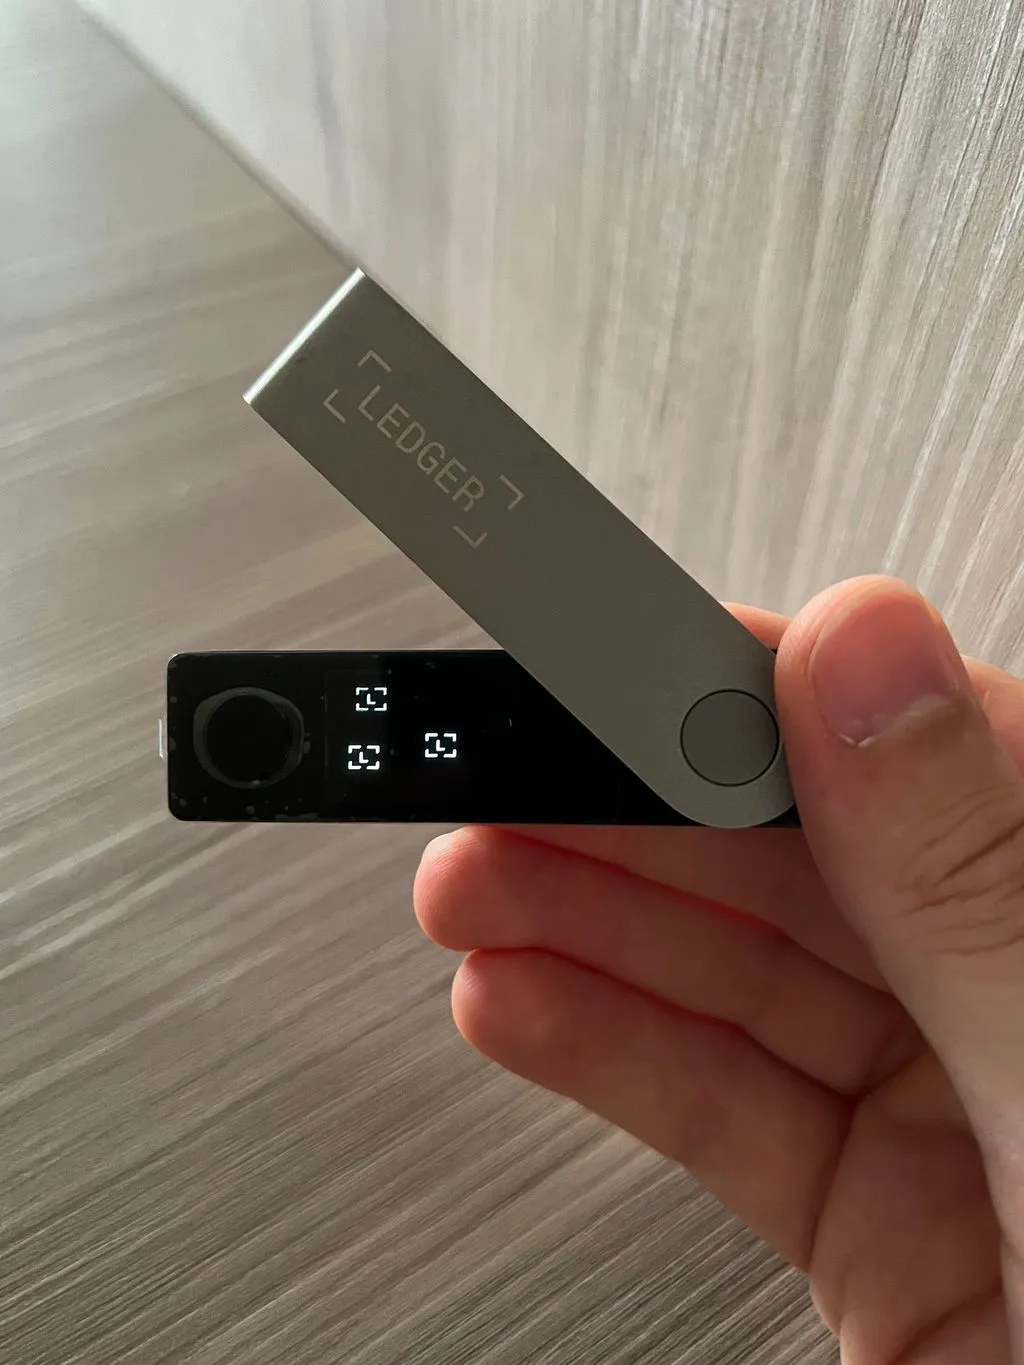 Ledger Nano X - an outstanding product backed by tremendous support